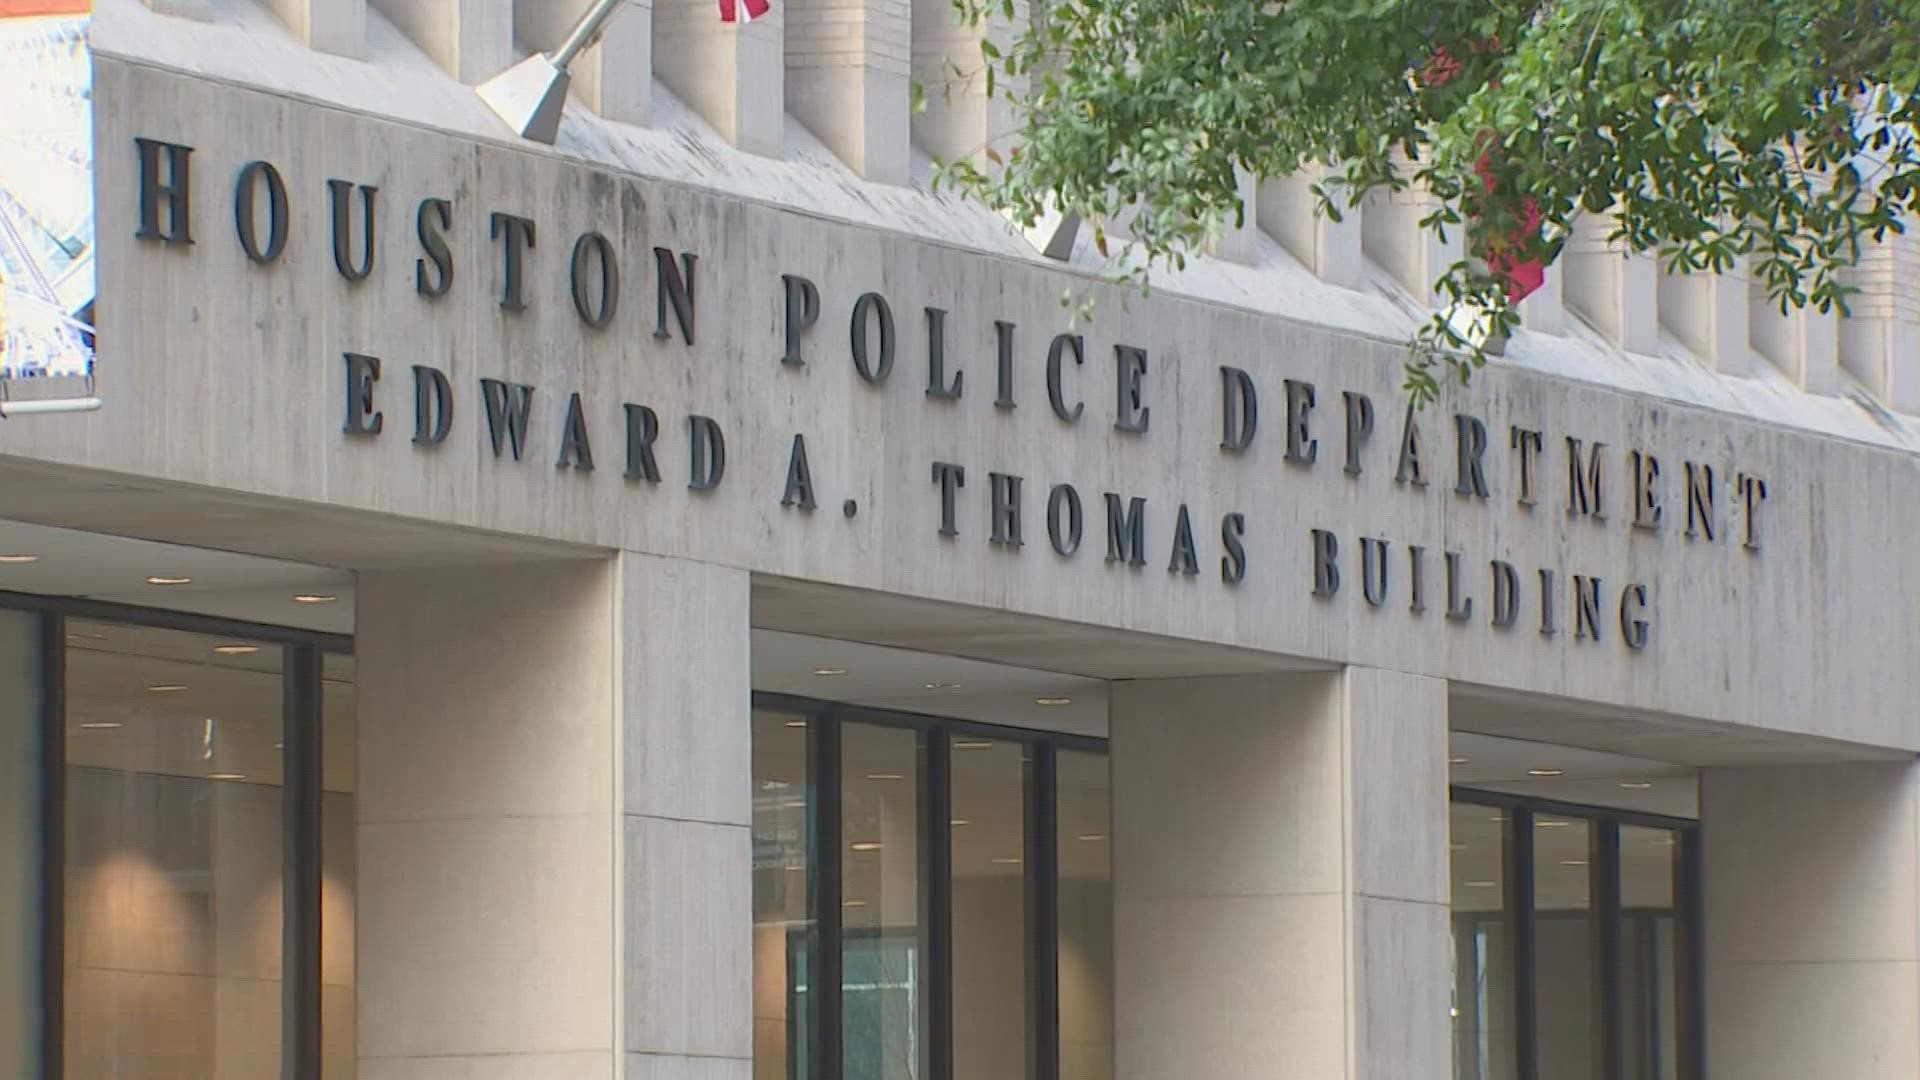 The Department of Justice awarded the Houston Police Department two grants totaling $1.3 million.